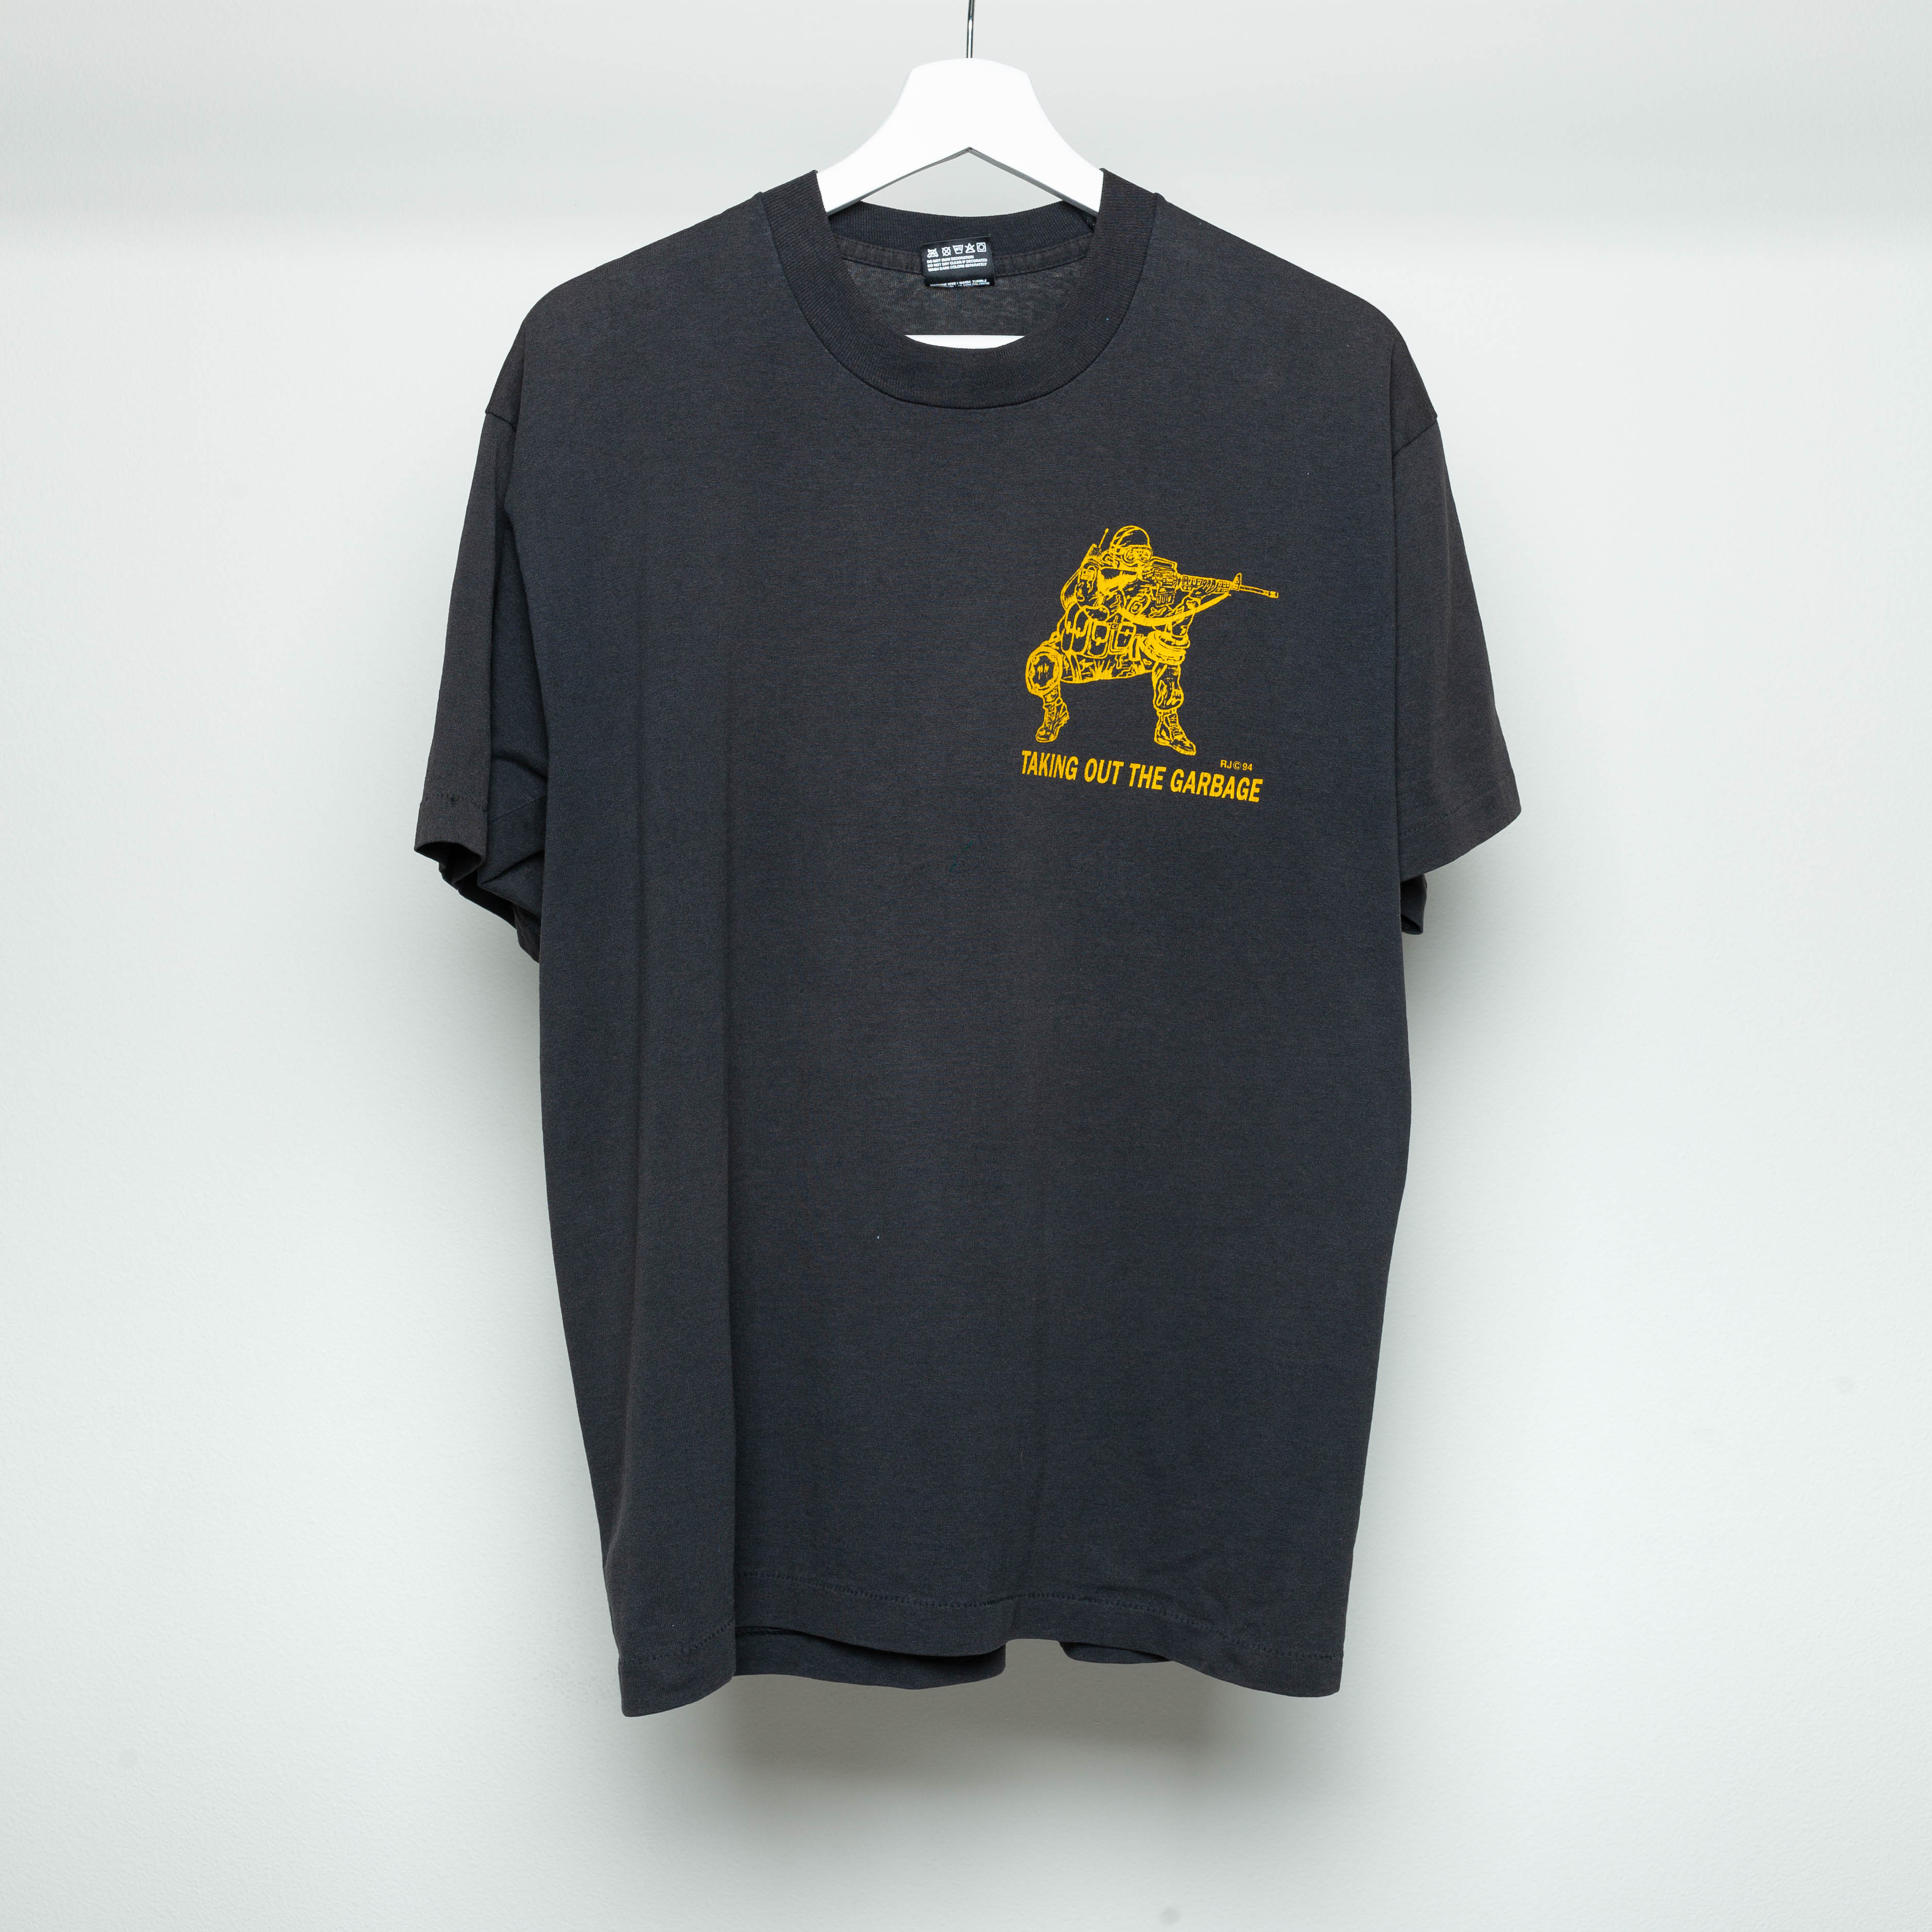 1994 Navy Seals Taking Out The Garbage T-Shirt Size L